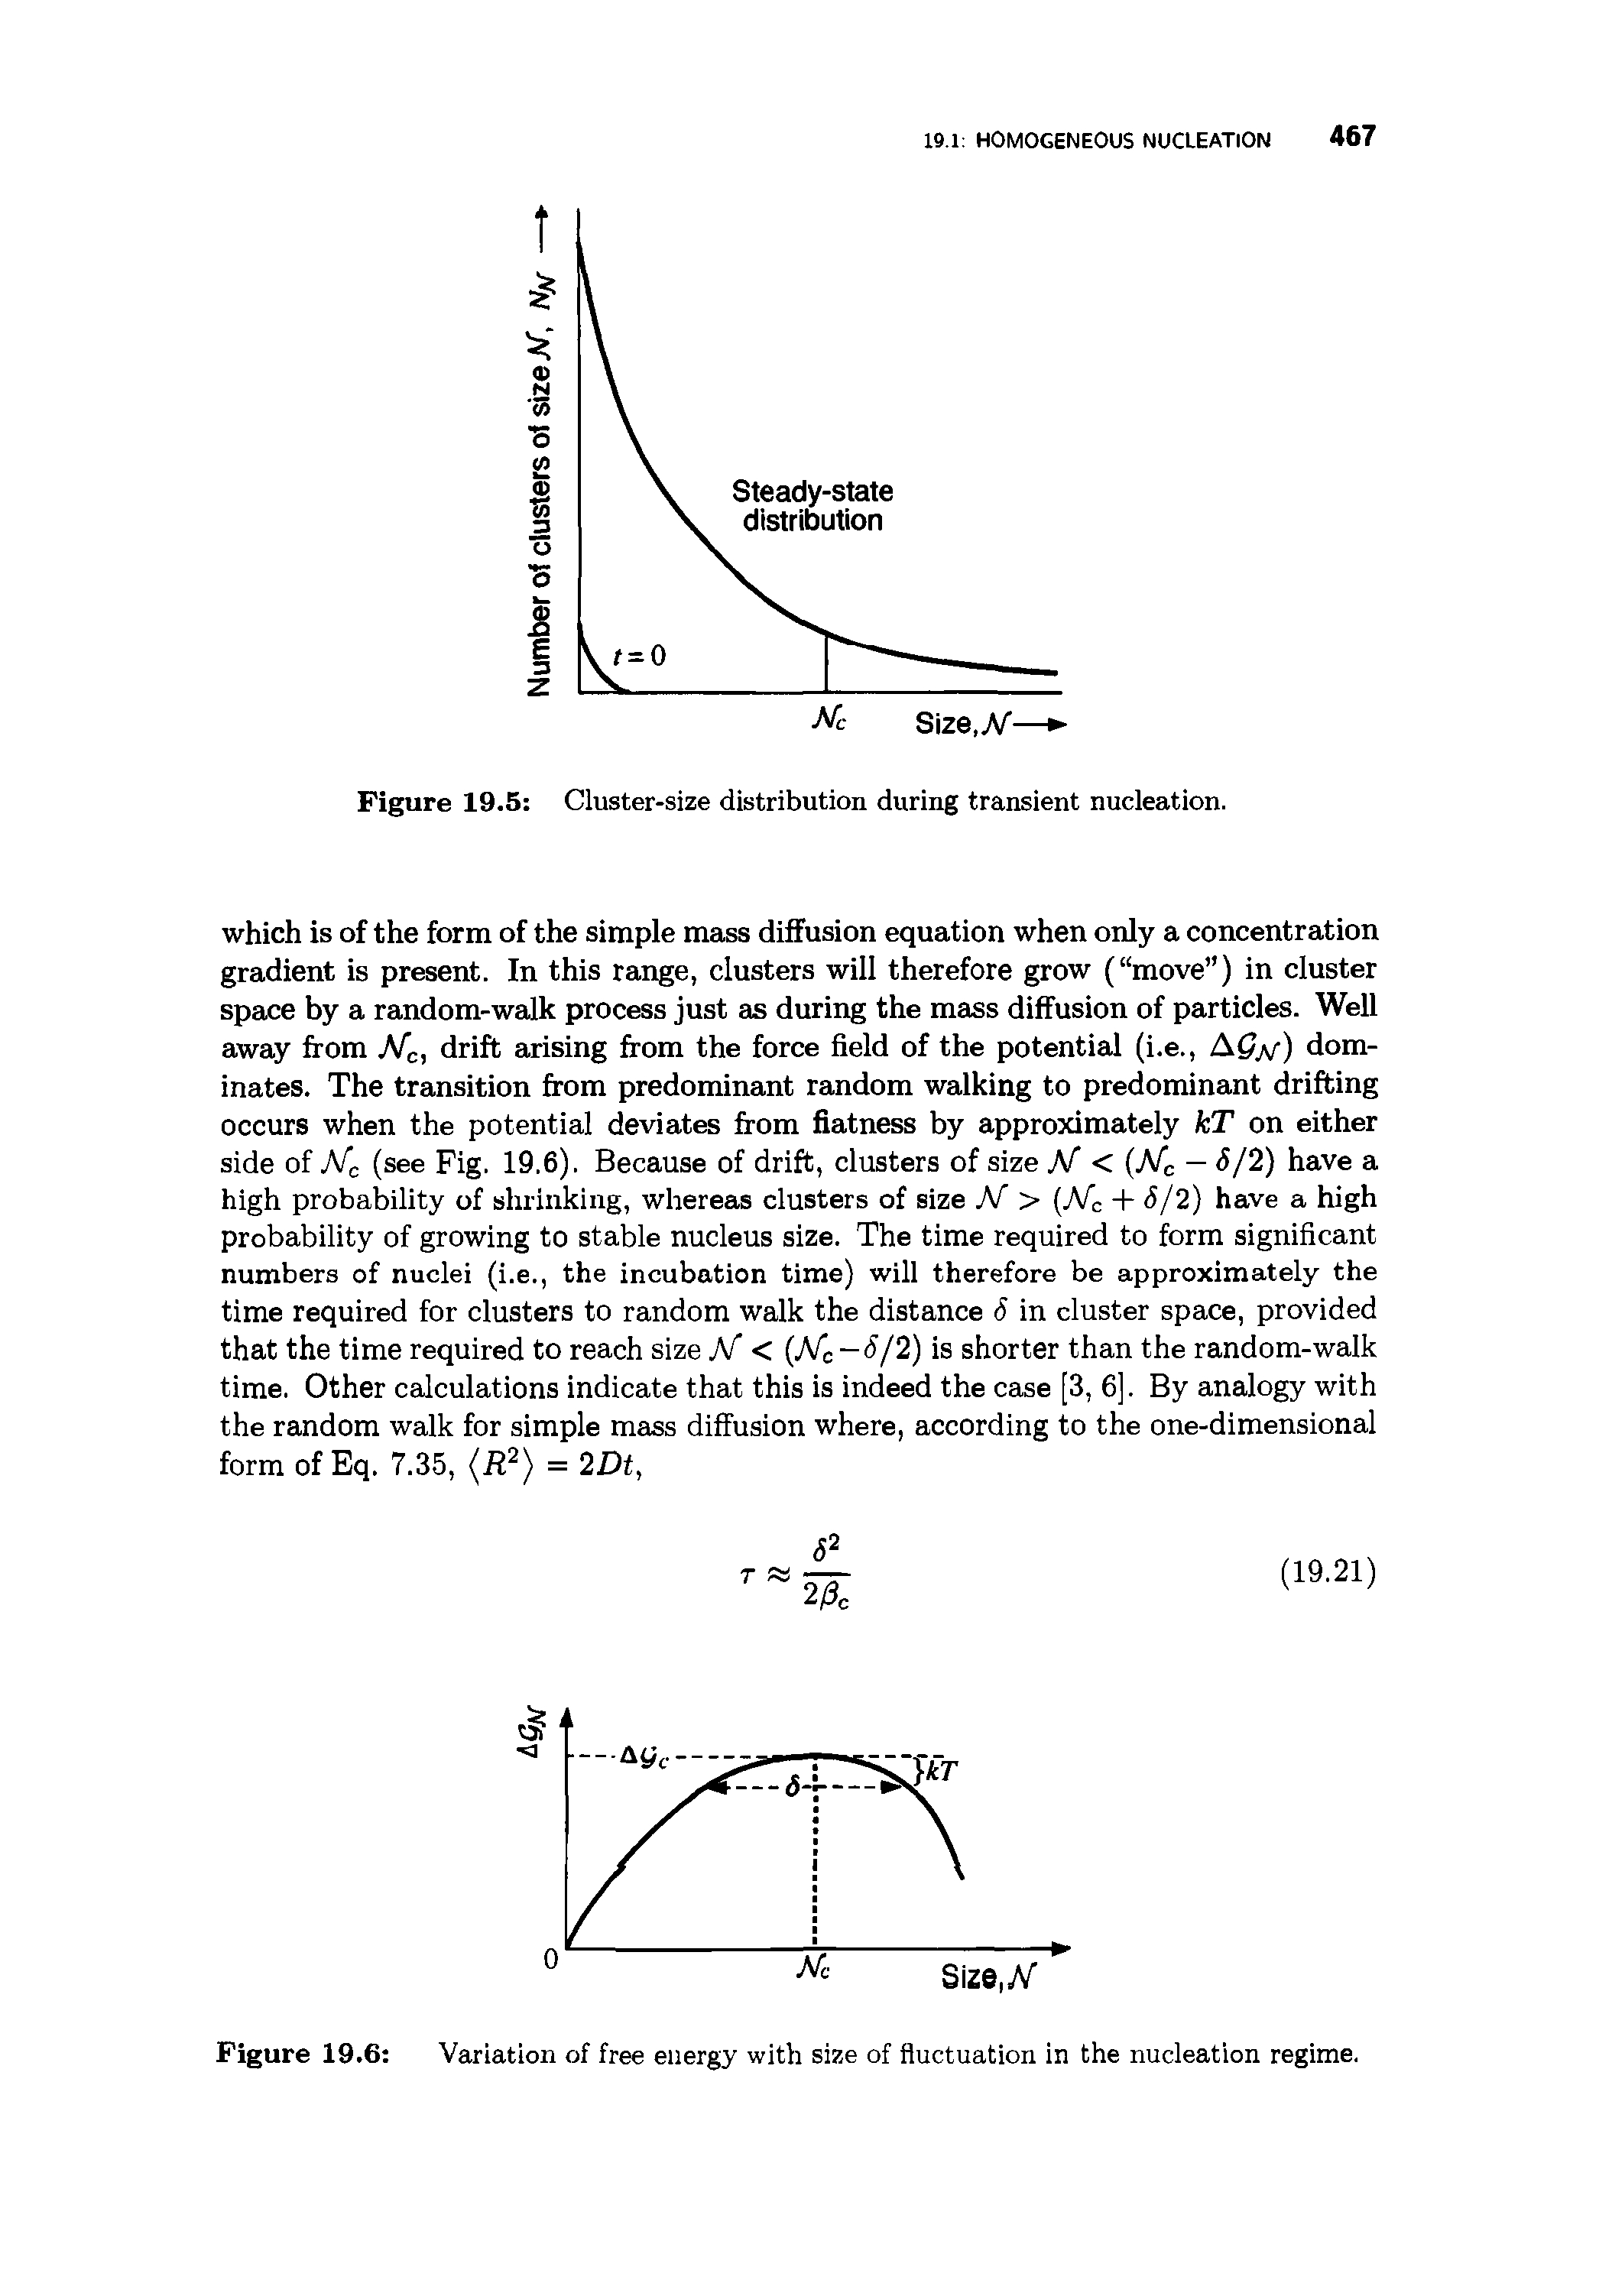 Figure 19.6 Variation of free energy with size of fluctuation in the nucleation regime.